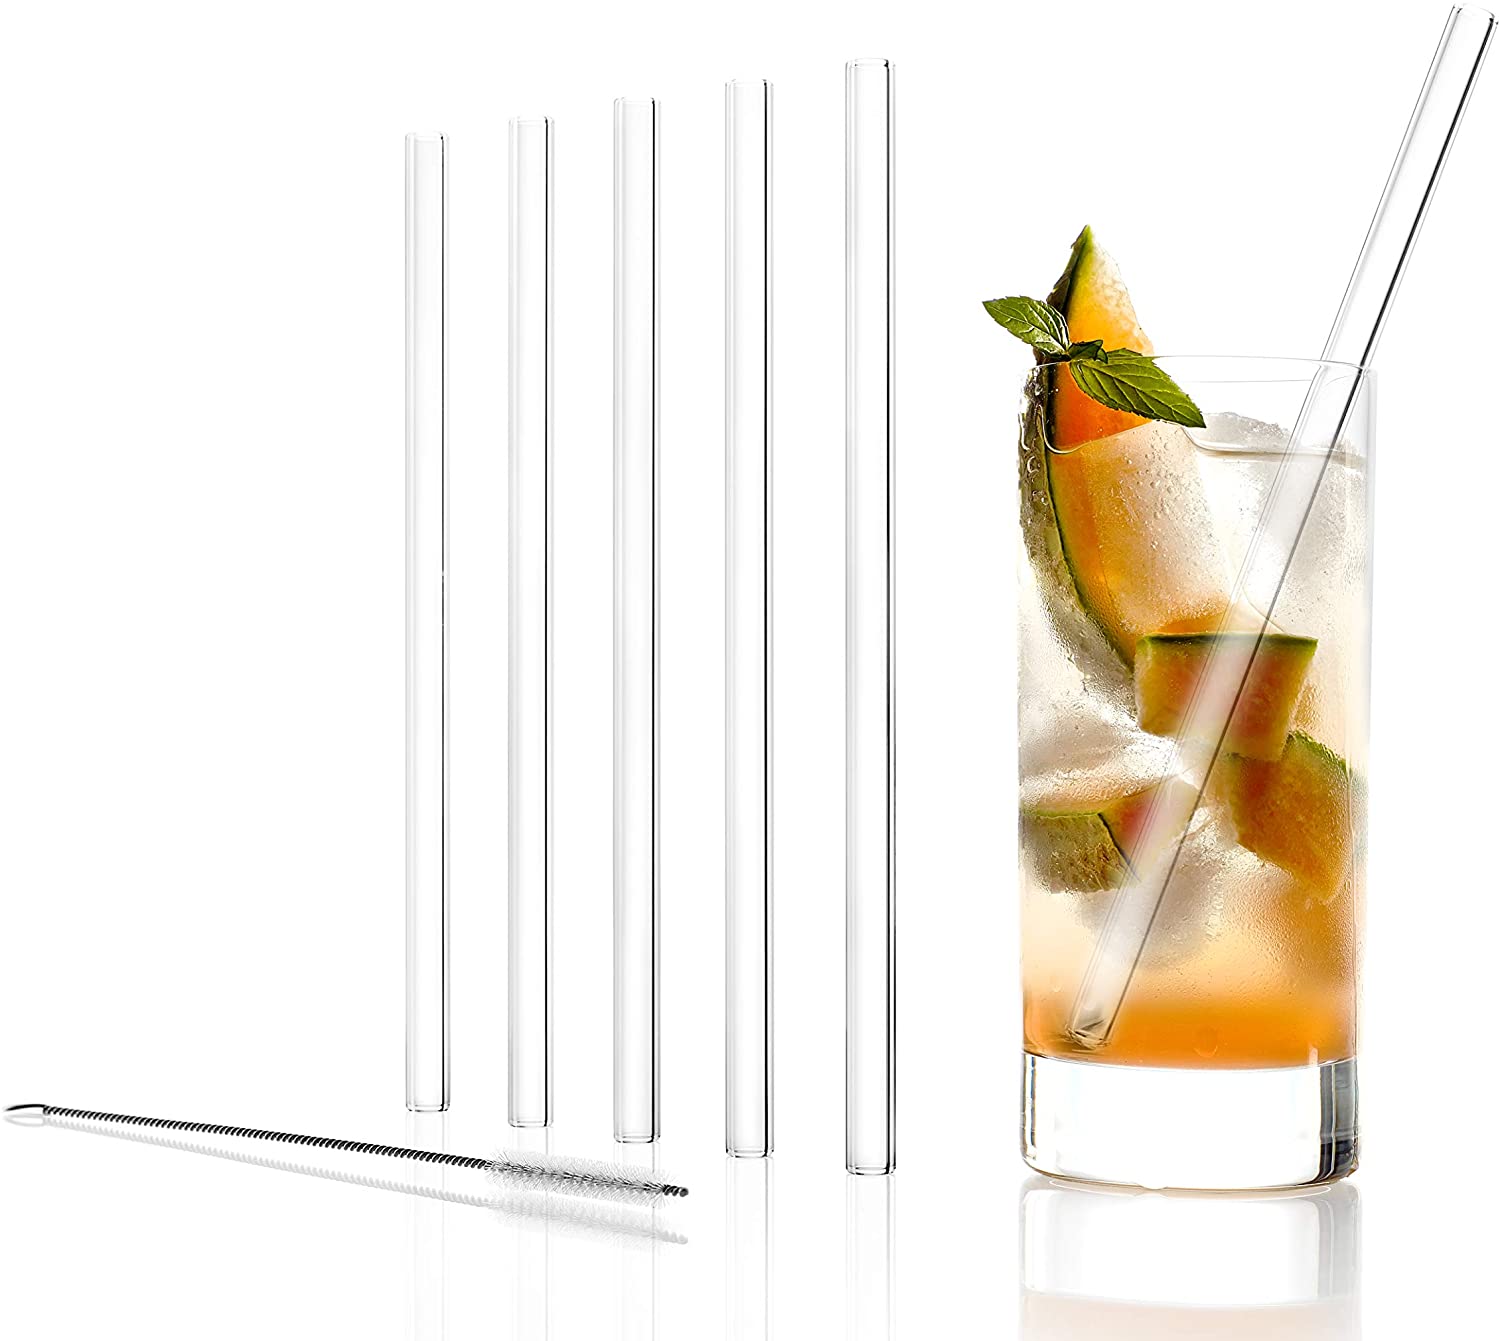 Stölzle Lausitz Glass Drinking Straws Clear Set of 6 Including Cleaning Brush: High-Quality and Sustainable Drinking Straws, Tasteless, Durable and Dishwasher Safe